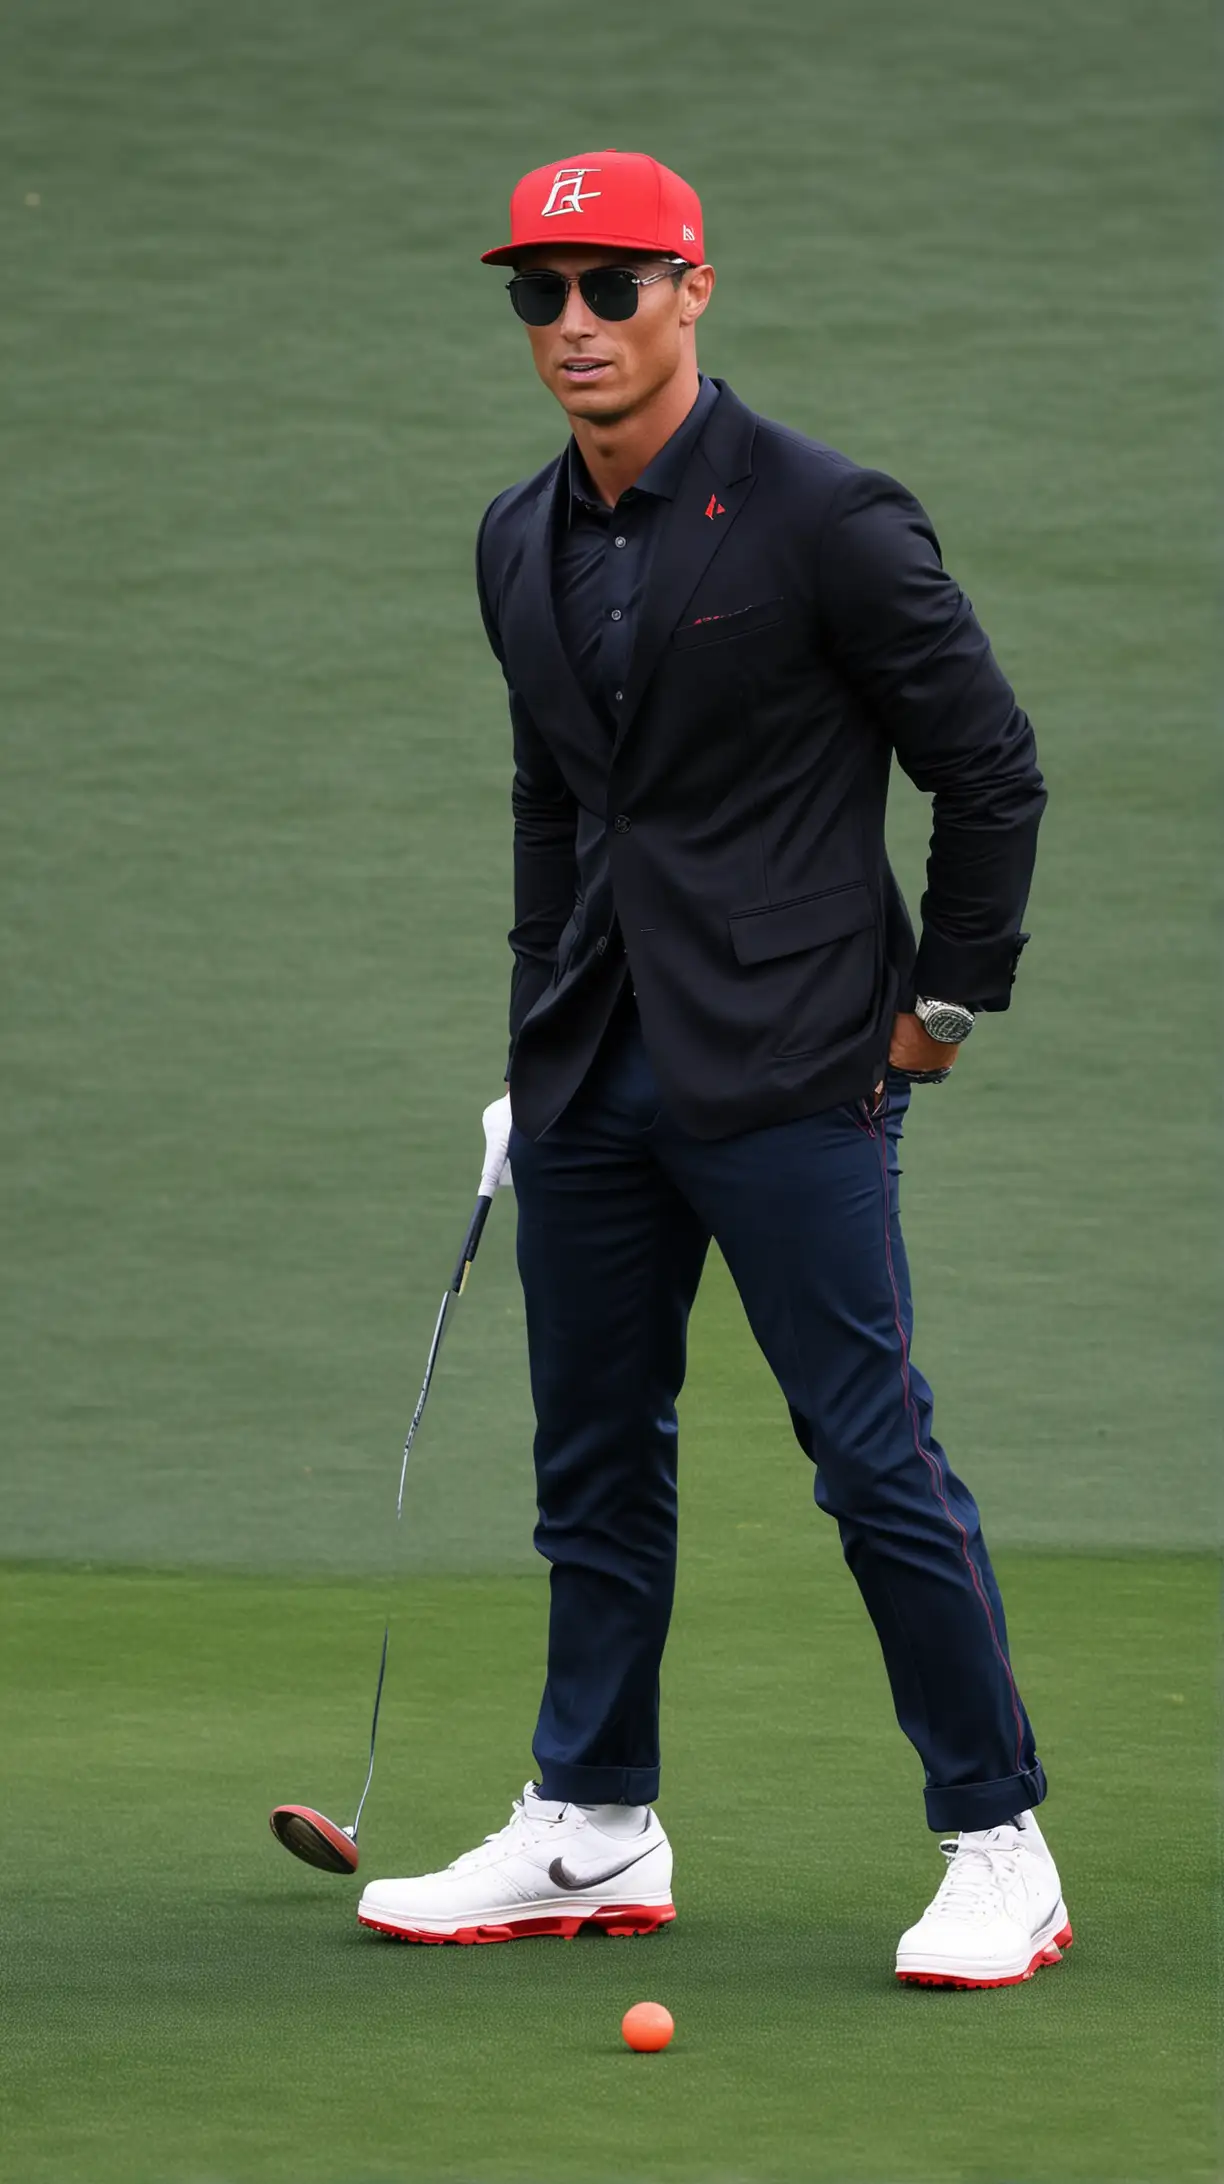 Cristiano Ronaldo Playing Golf in Stylish Black Jacket and Red Hat